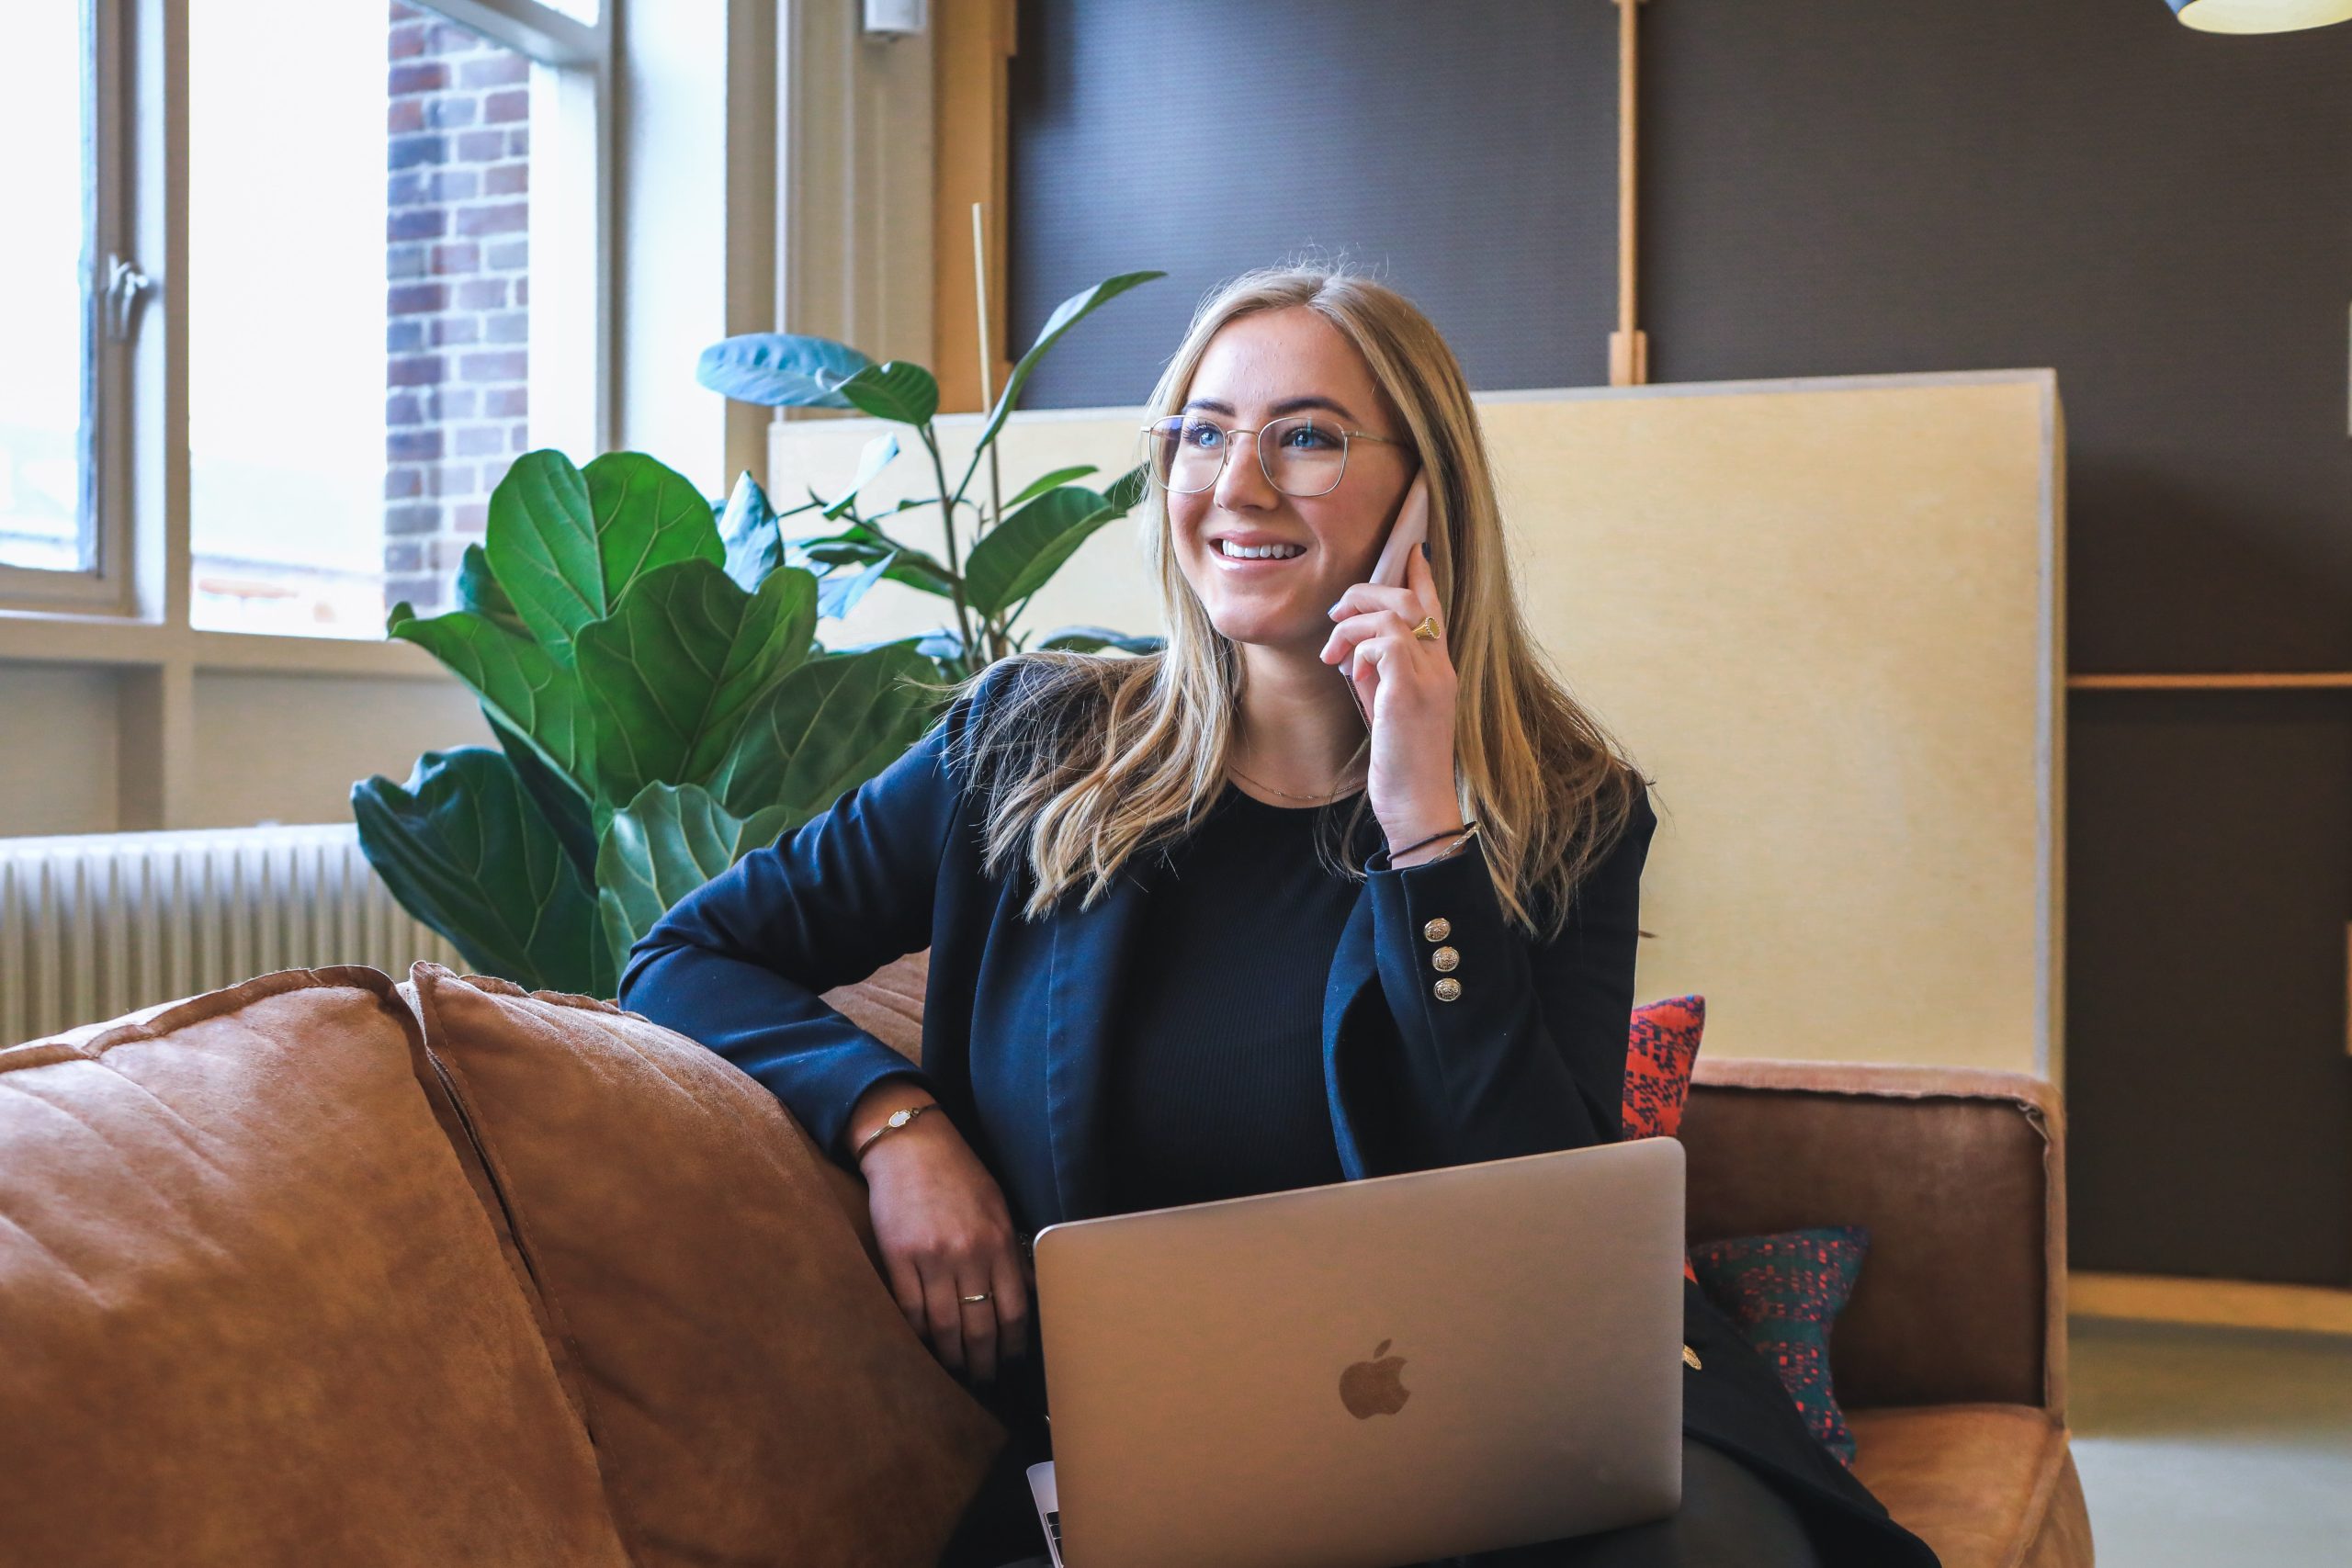 In an article about becoming a recruiter, a woman talks on the phone with a laptop in her lap.